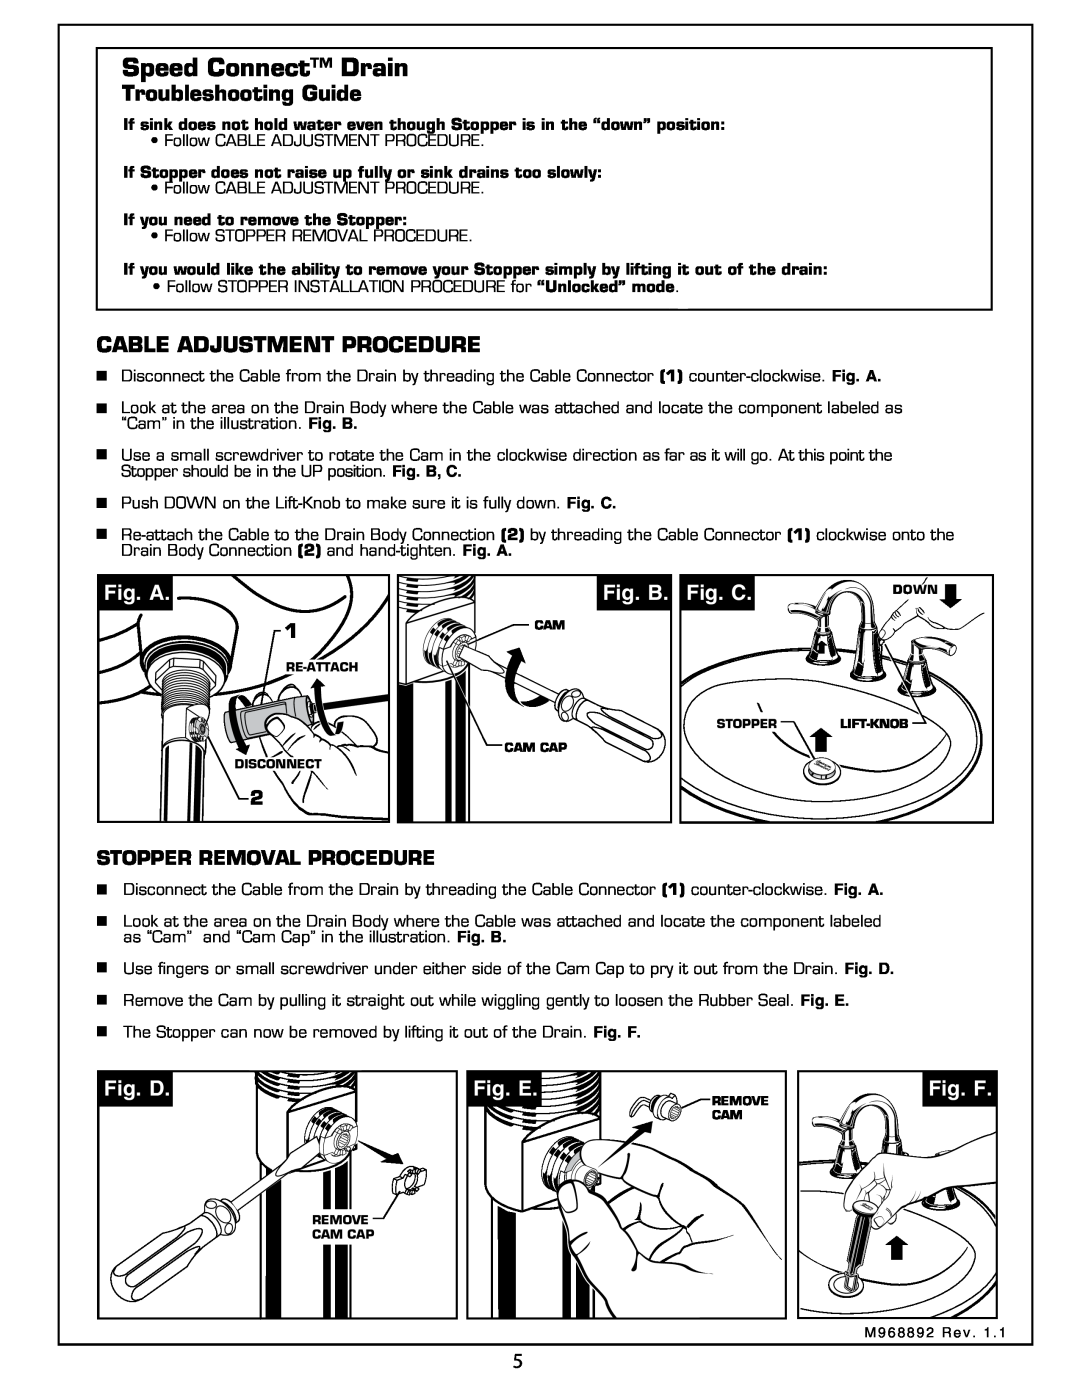 American Standard 7038.801 Troubleshooting Guide, Cable Adjustment Procedure, Fig. A, Fig. B, Fig. C, Fig. D, Fig. E 